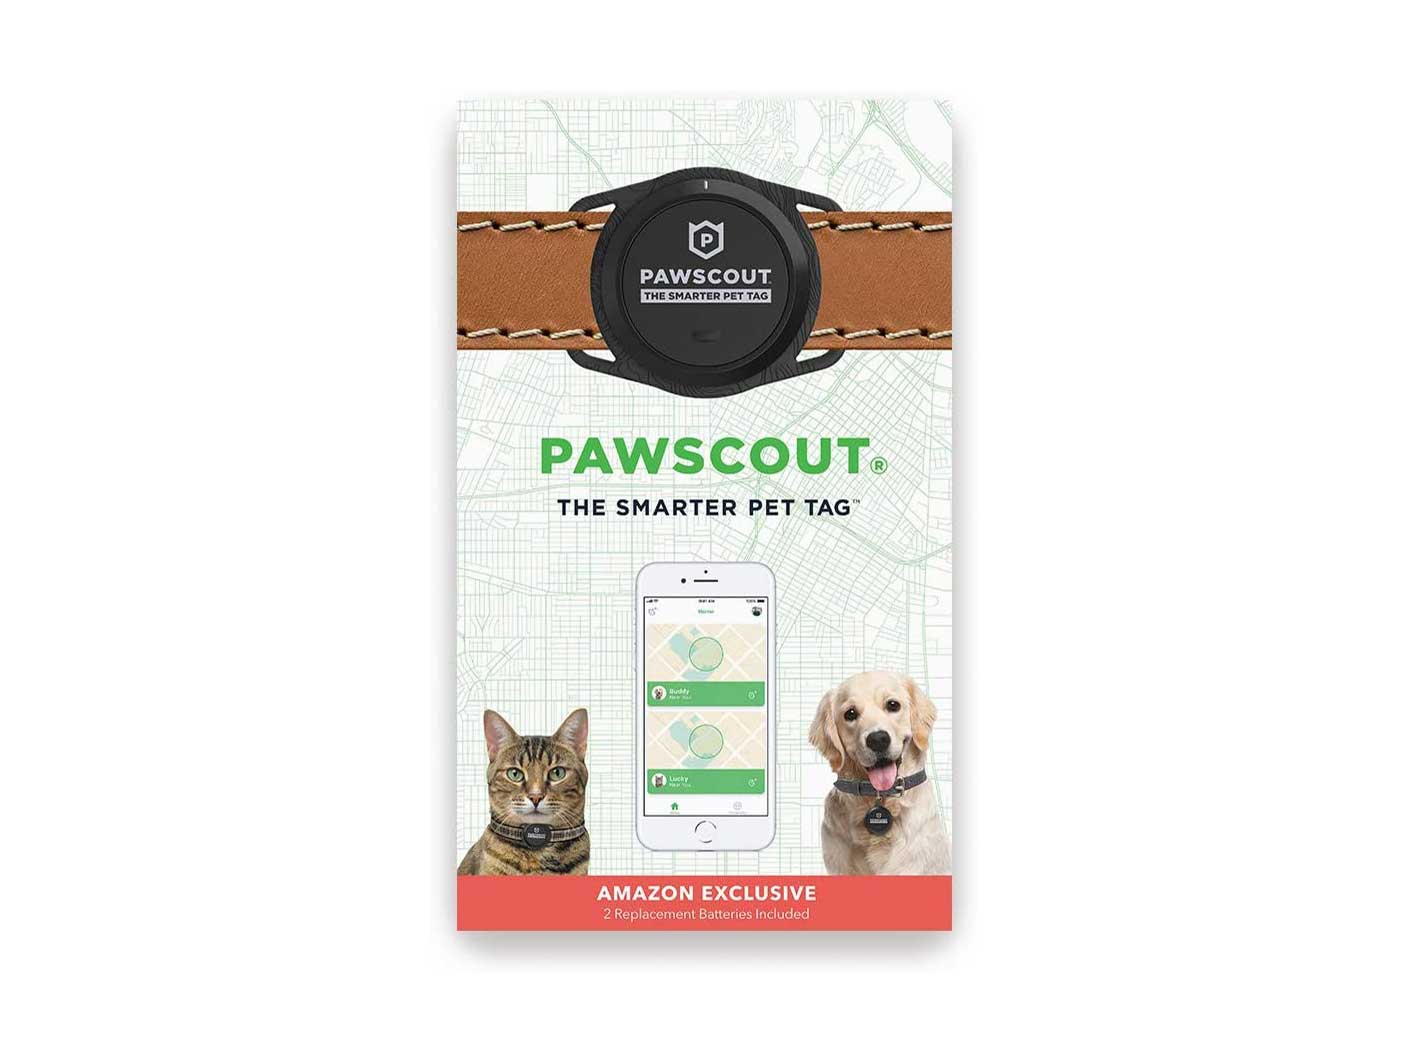 Pawscout Smarter Pet Tag (New Version 2.0) - Cat & Dog Tag, Lost Pet Alerts, Bluetooth Virtual Leash, Medical Profile, Walk Tracker, Pet Points of Interest, No Monthly Fees